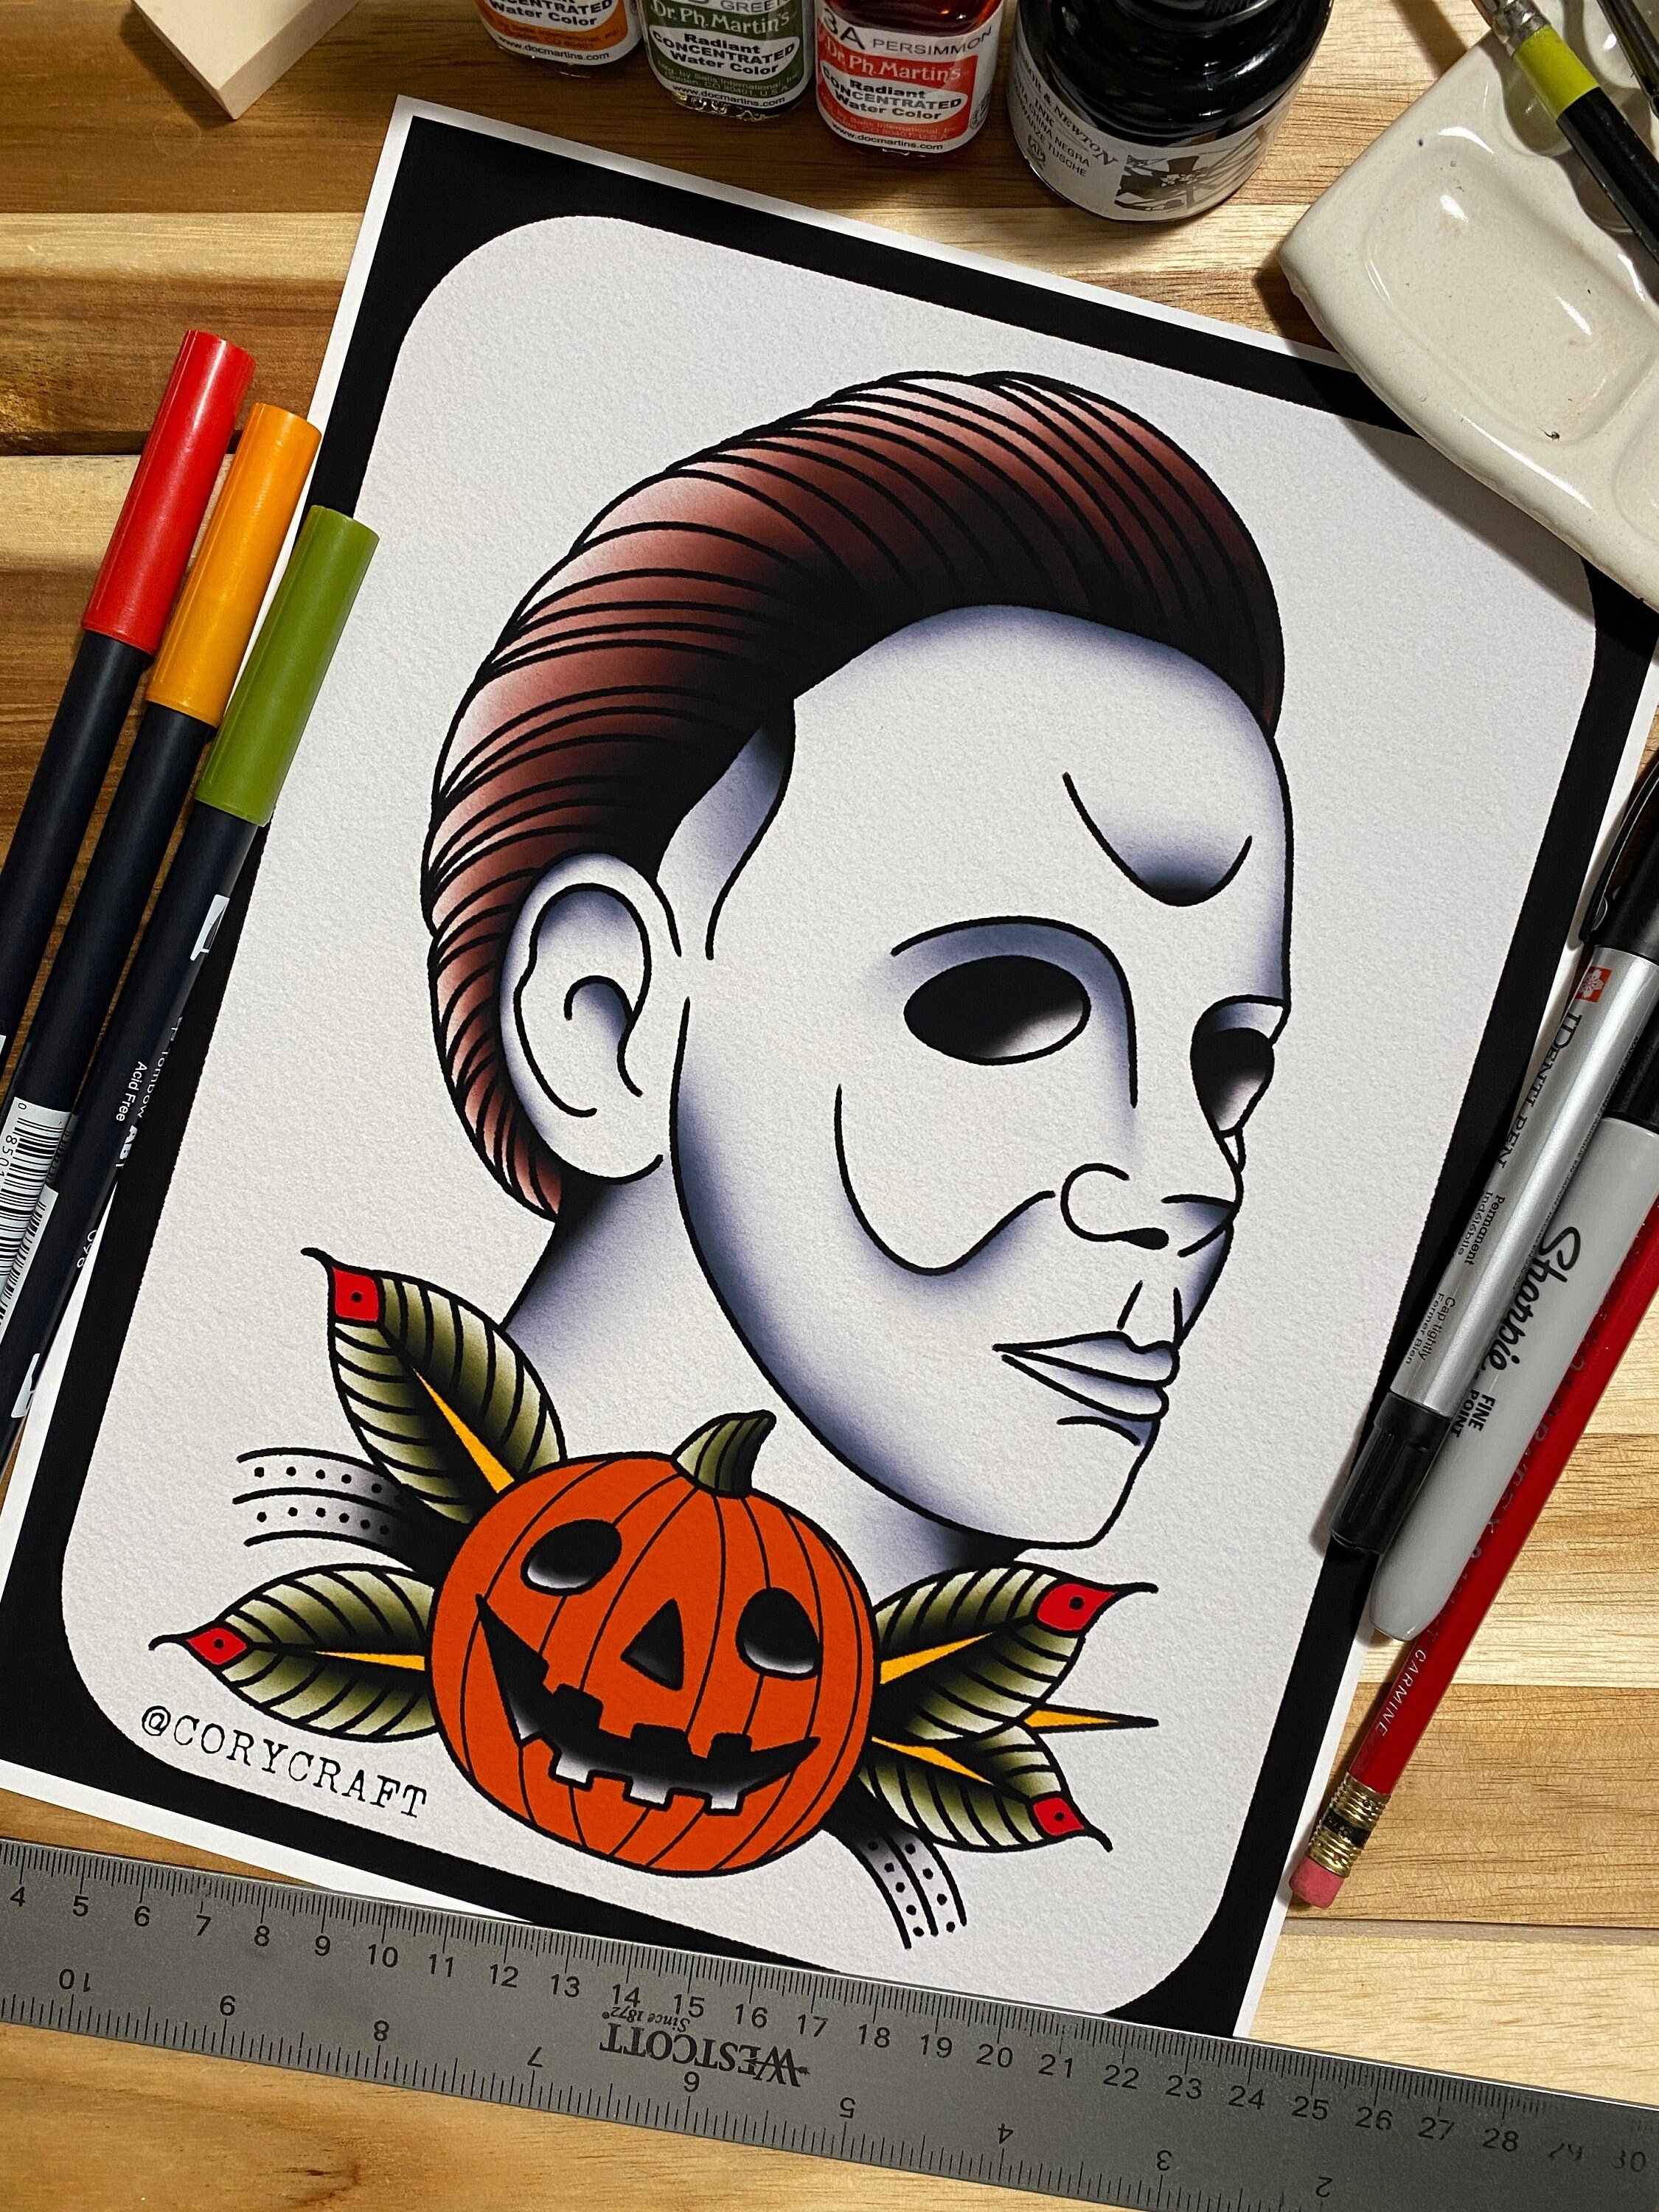 50 Michael Myers Tattoo Designs You Will Never Forget  InkMatch